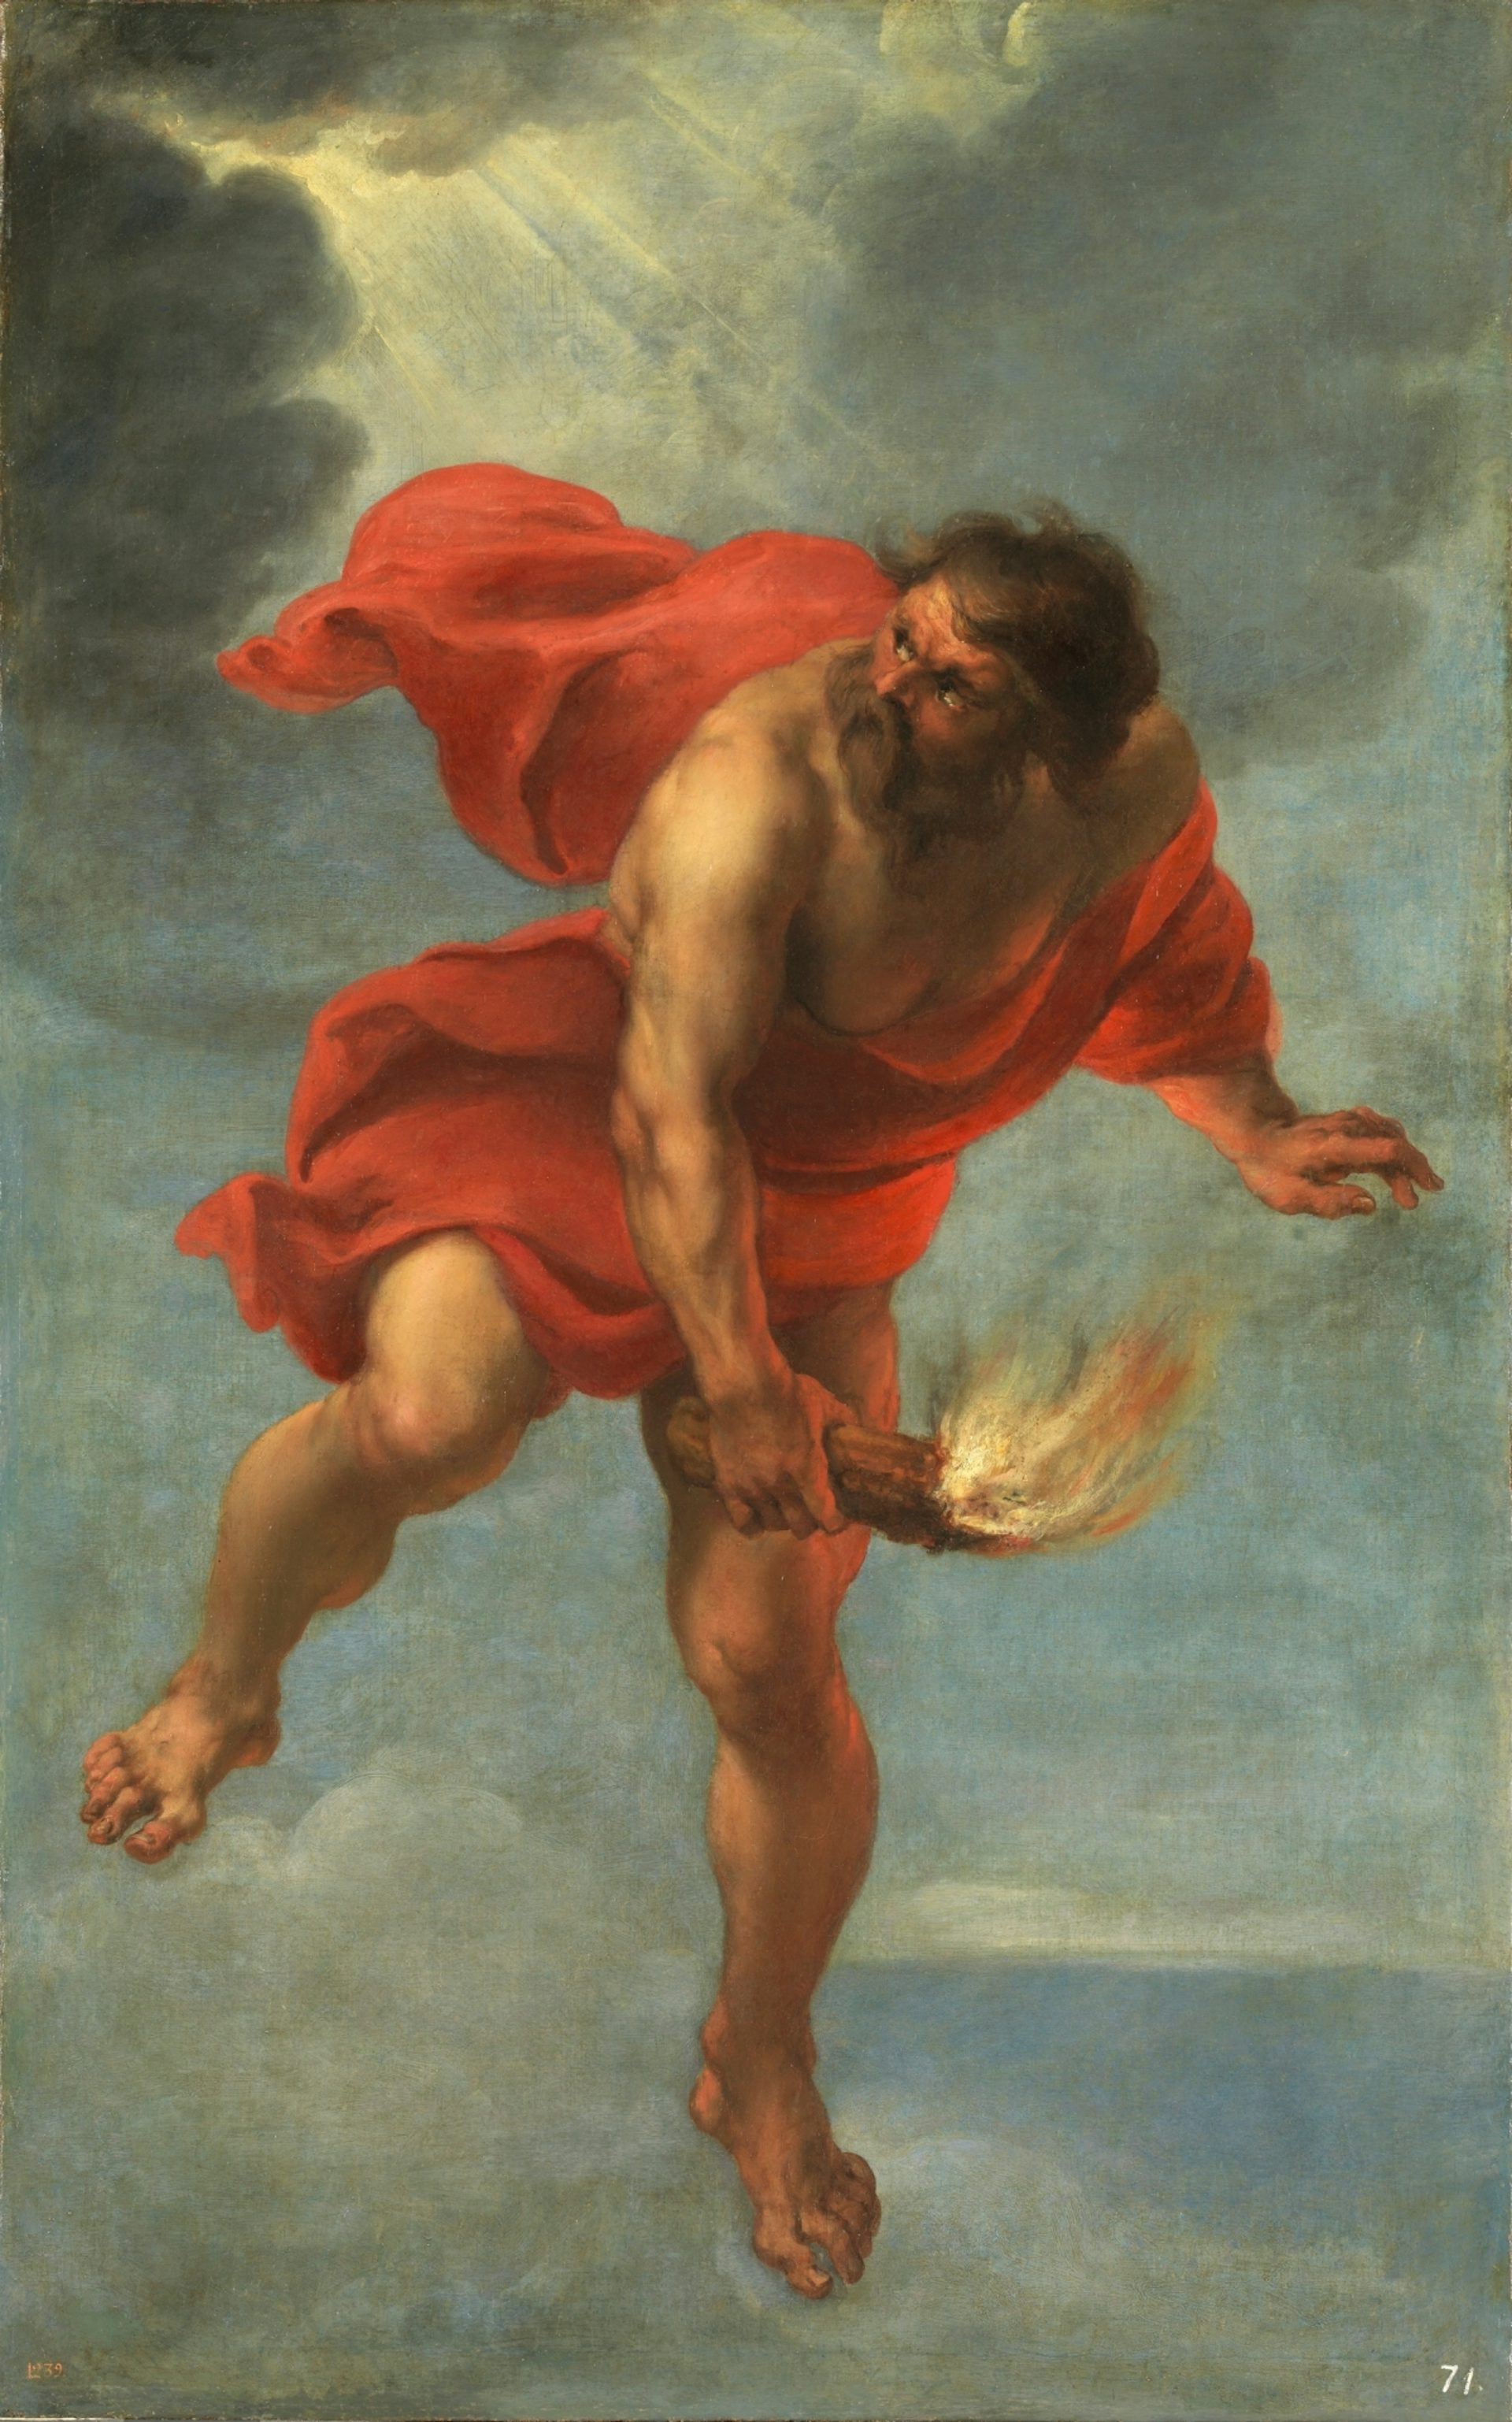 Prometheus painting by Jan Cossiers, 1636-1638